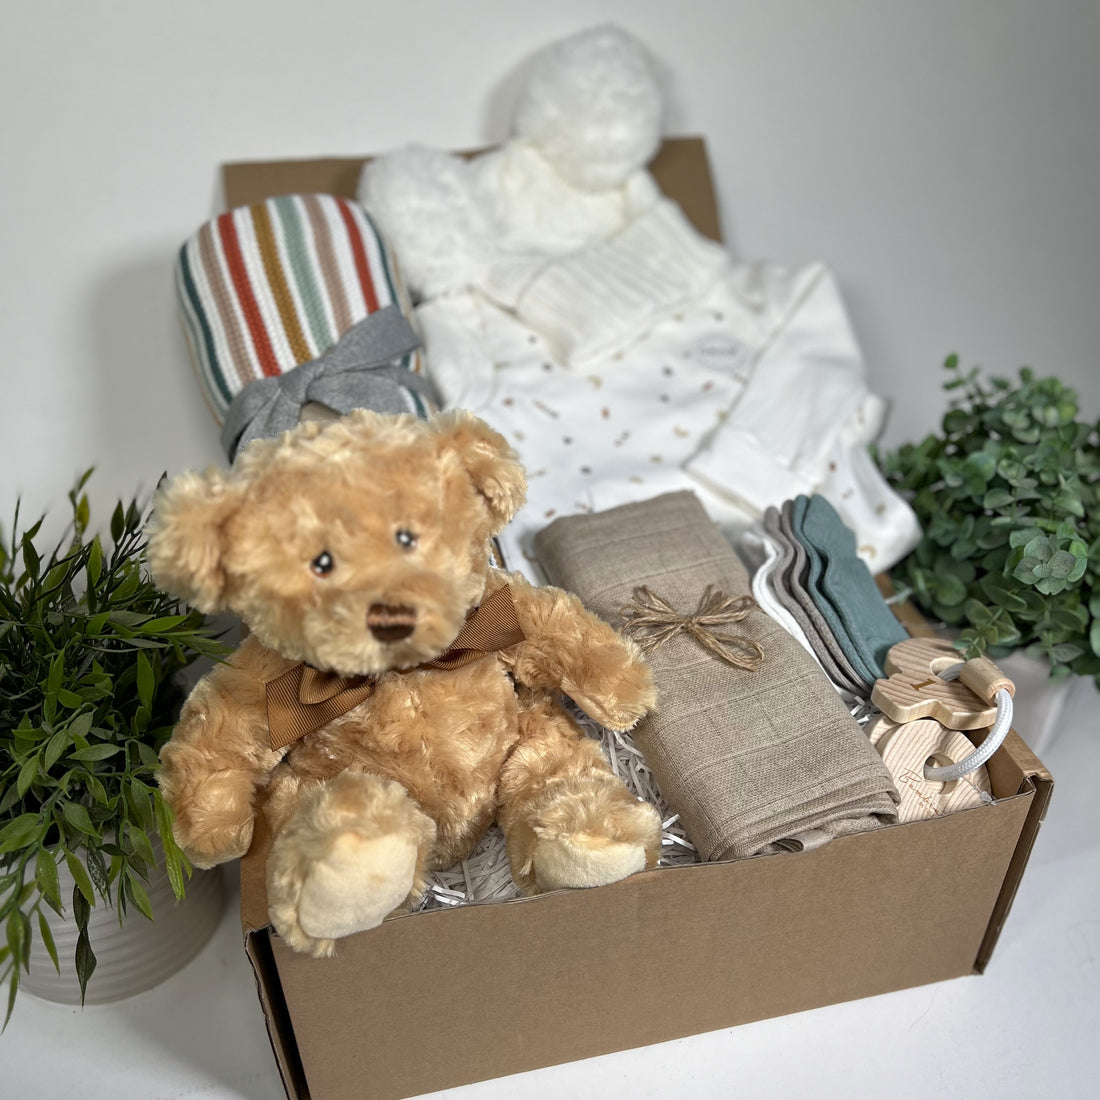 Finding a way forward - In The Box Baby Hampers